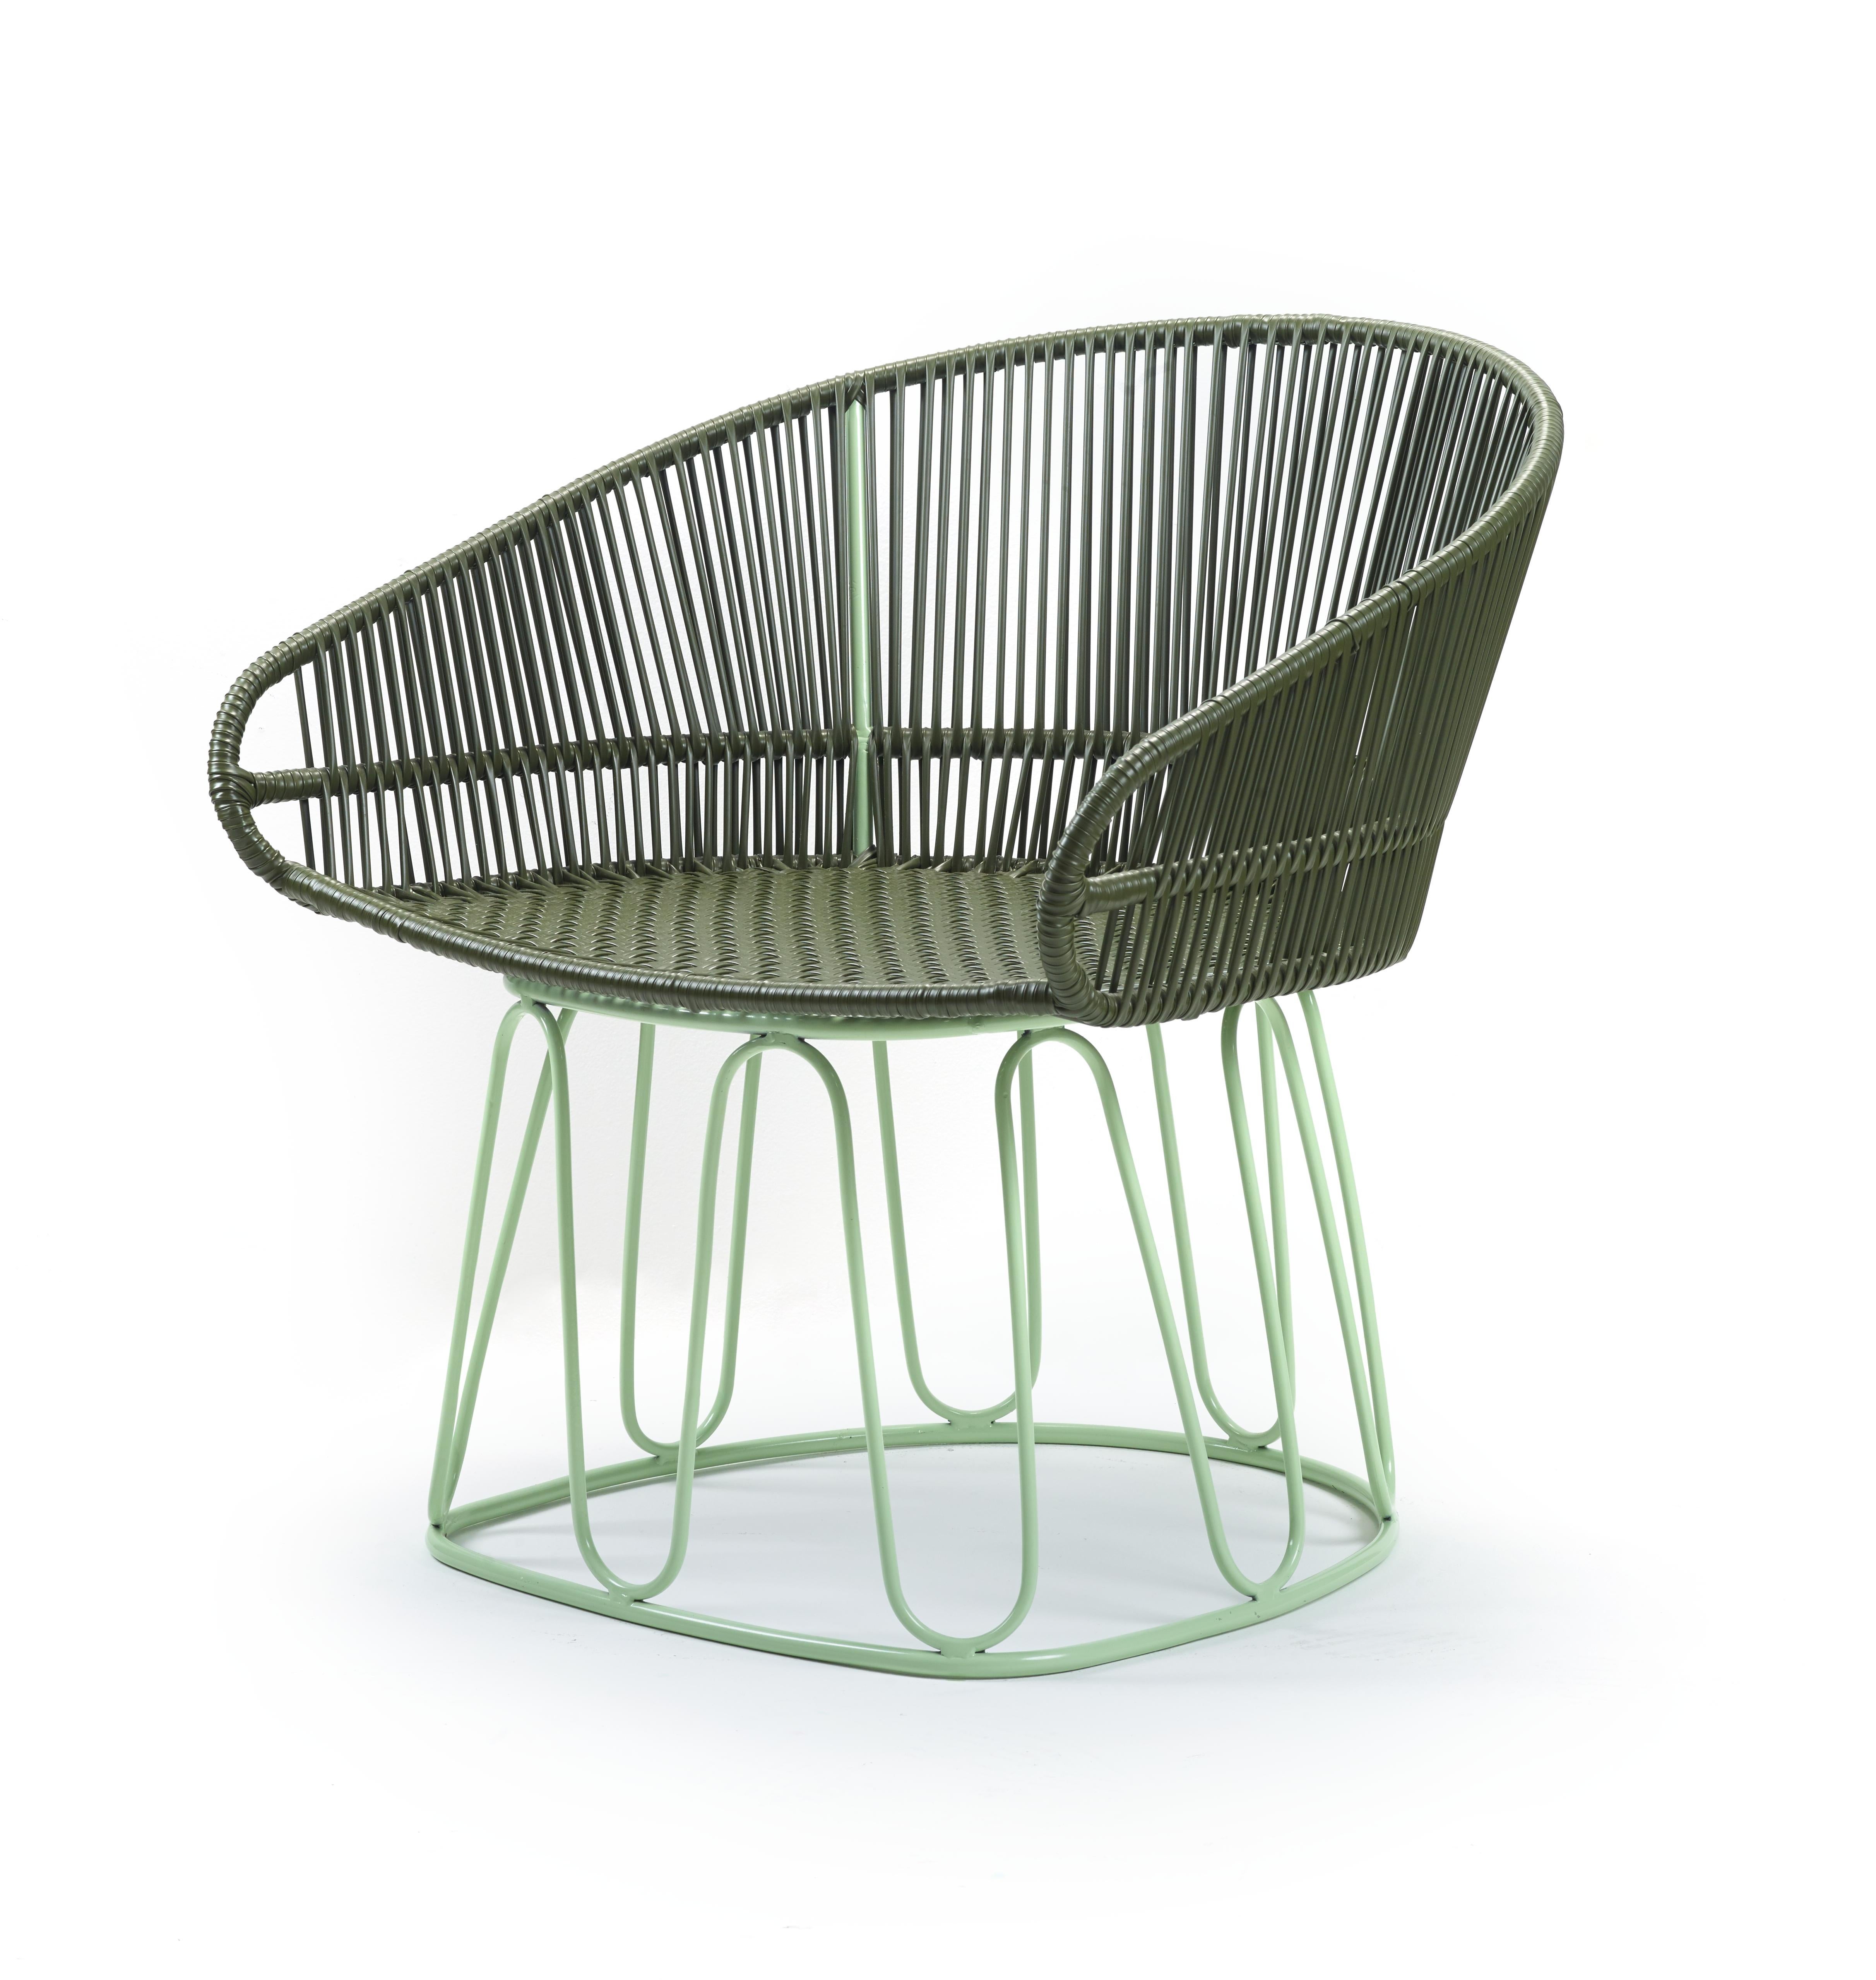 Set of 4 olive circo lounge chair by Sebastian Herkner
Materials: Galvanized and powder-coated tubular steel. PVC strings.
Technique: Made from recycled plastic. Weaved by local craftspeople in Colombia. 
Dimensions: W 74 x D 66.2 x H 73 cm